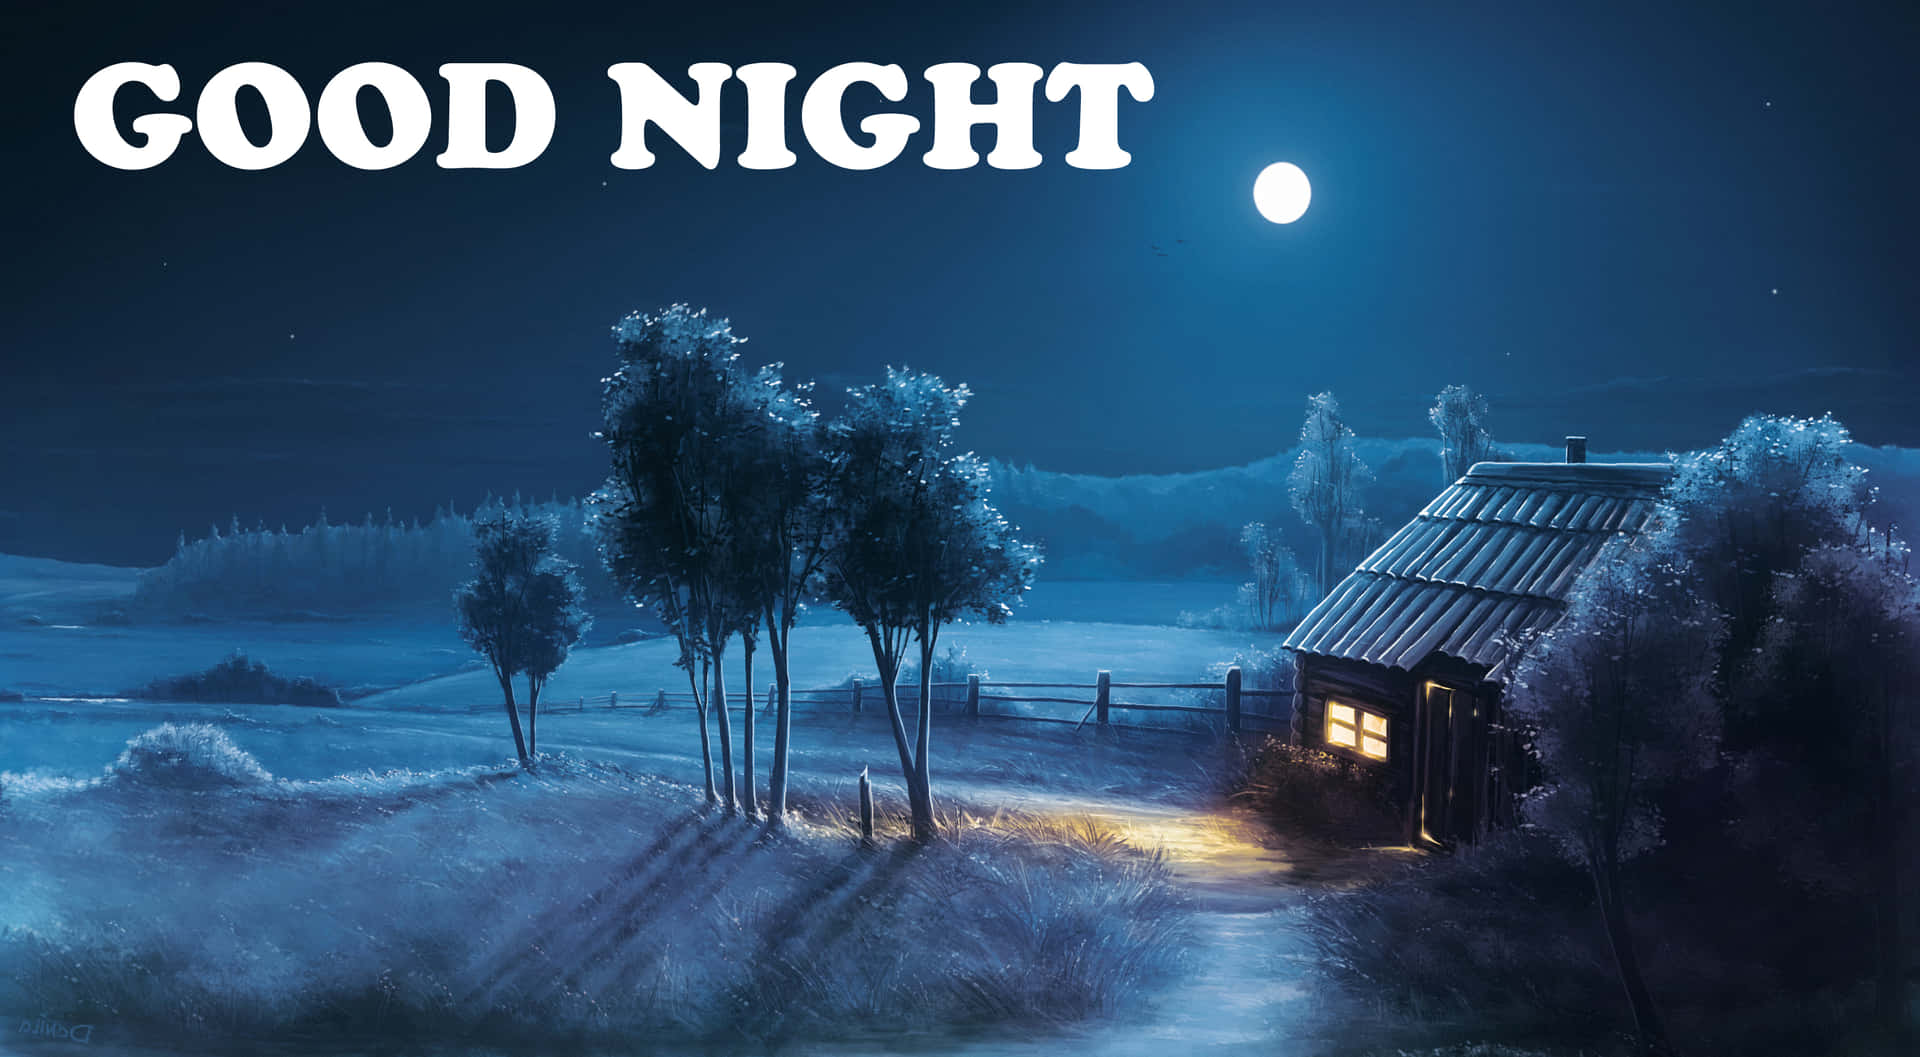 Download Good Night Pictures | Wallpapers.com